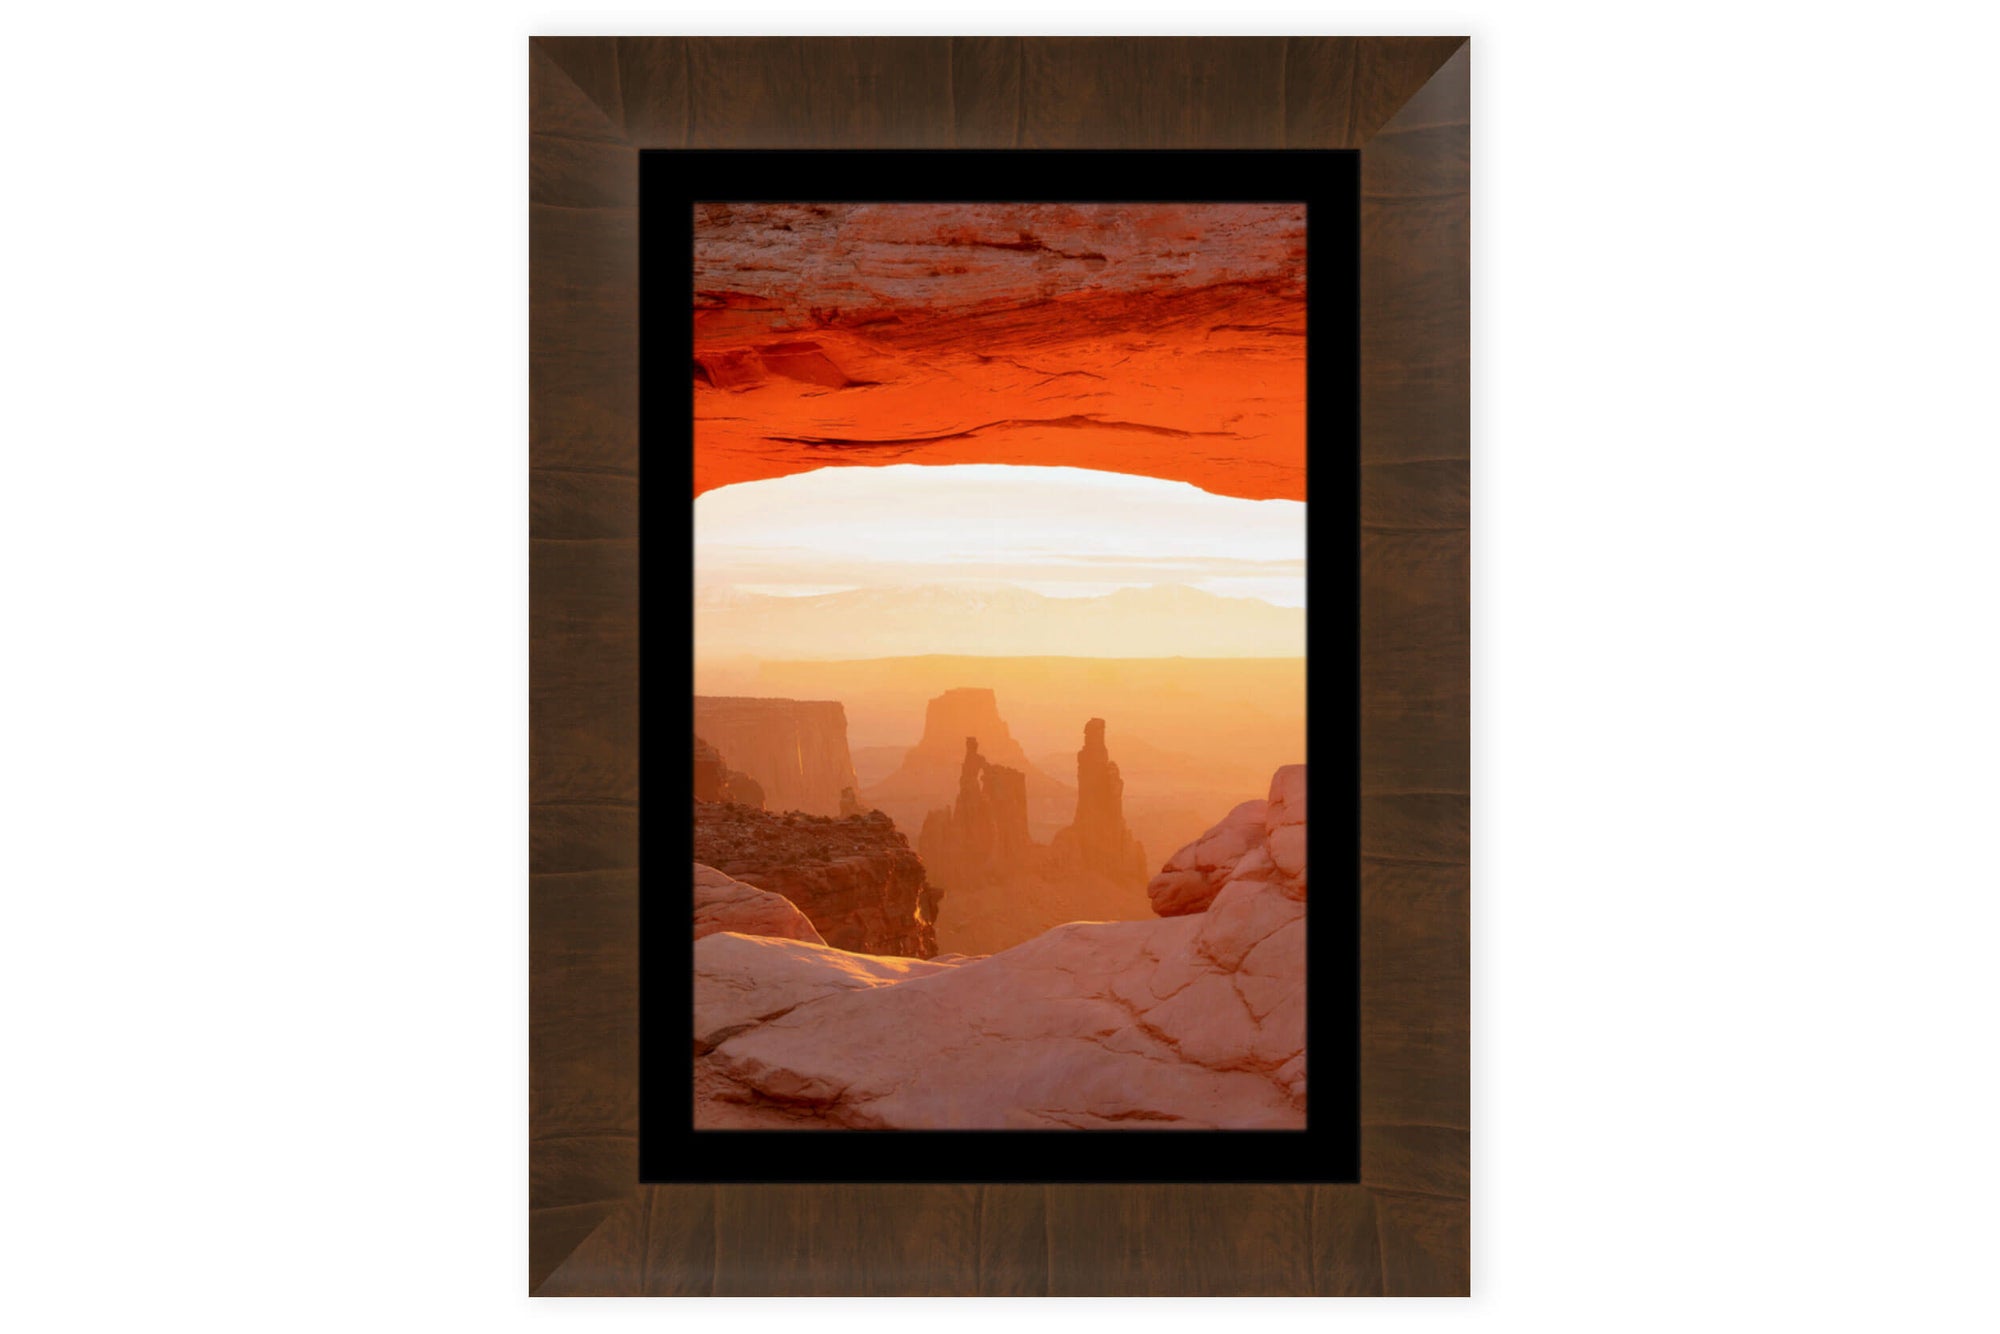 A framed Mesa Arch picture at sunrise from this hike in Canyonlands National Park in Utah.